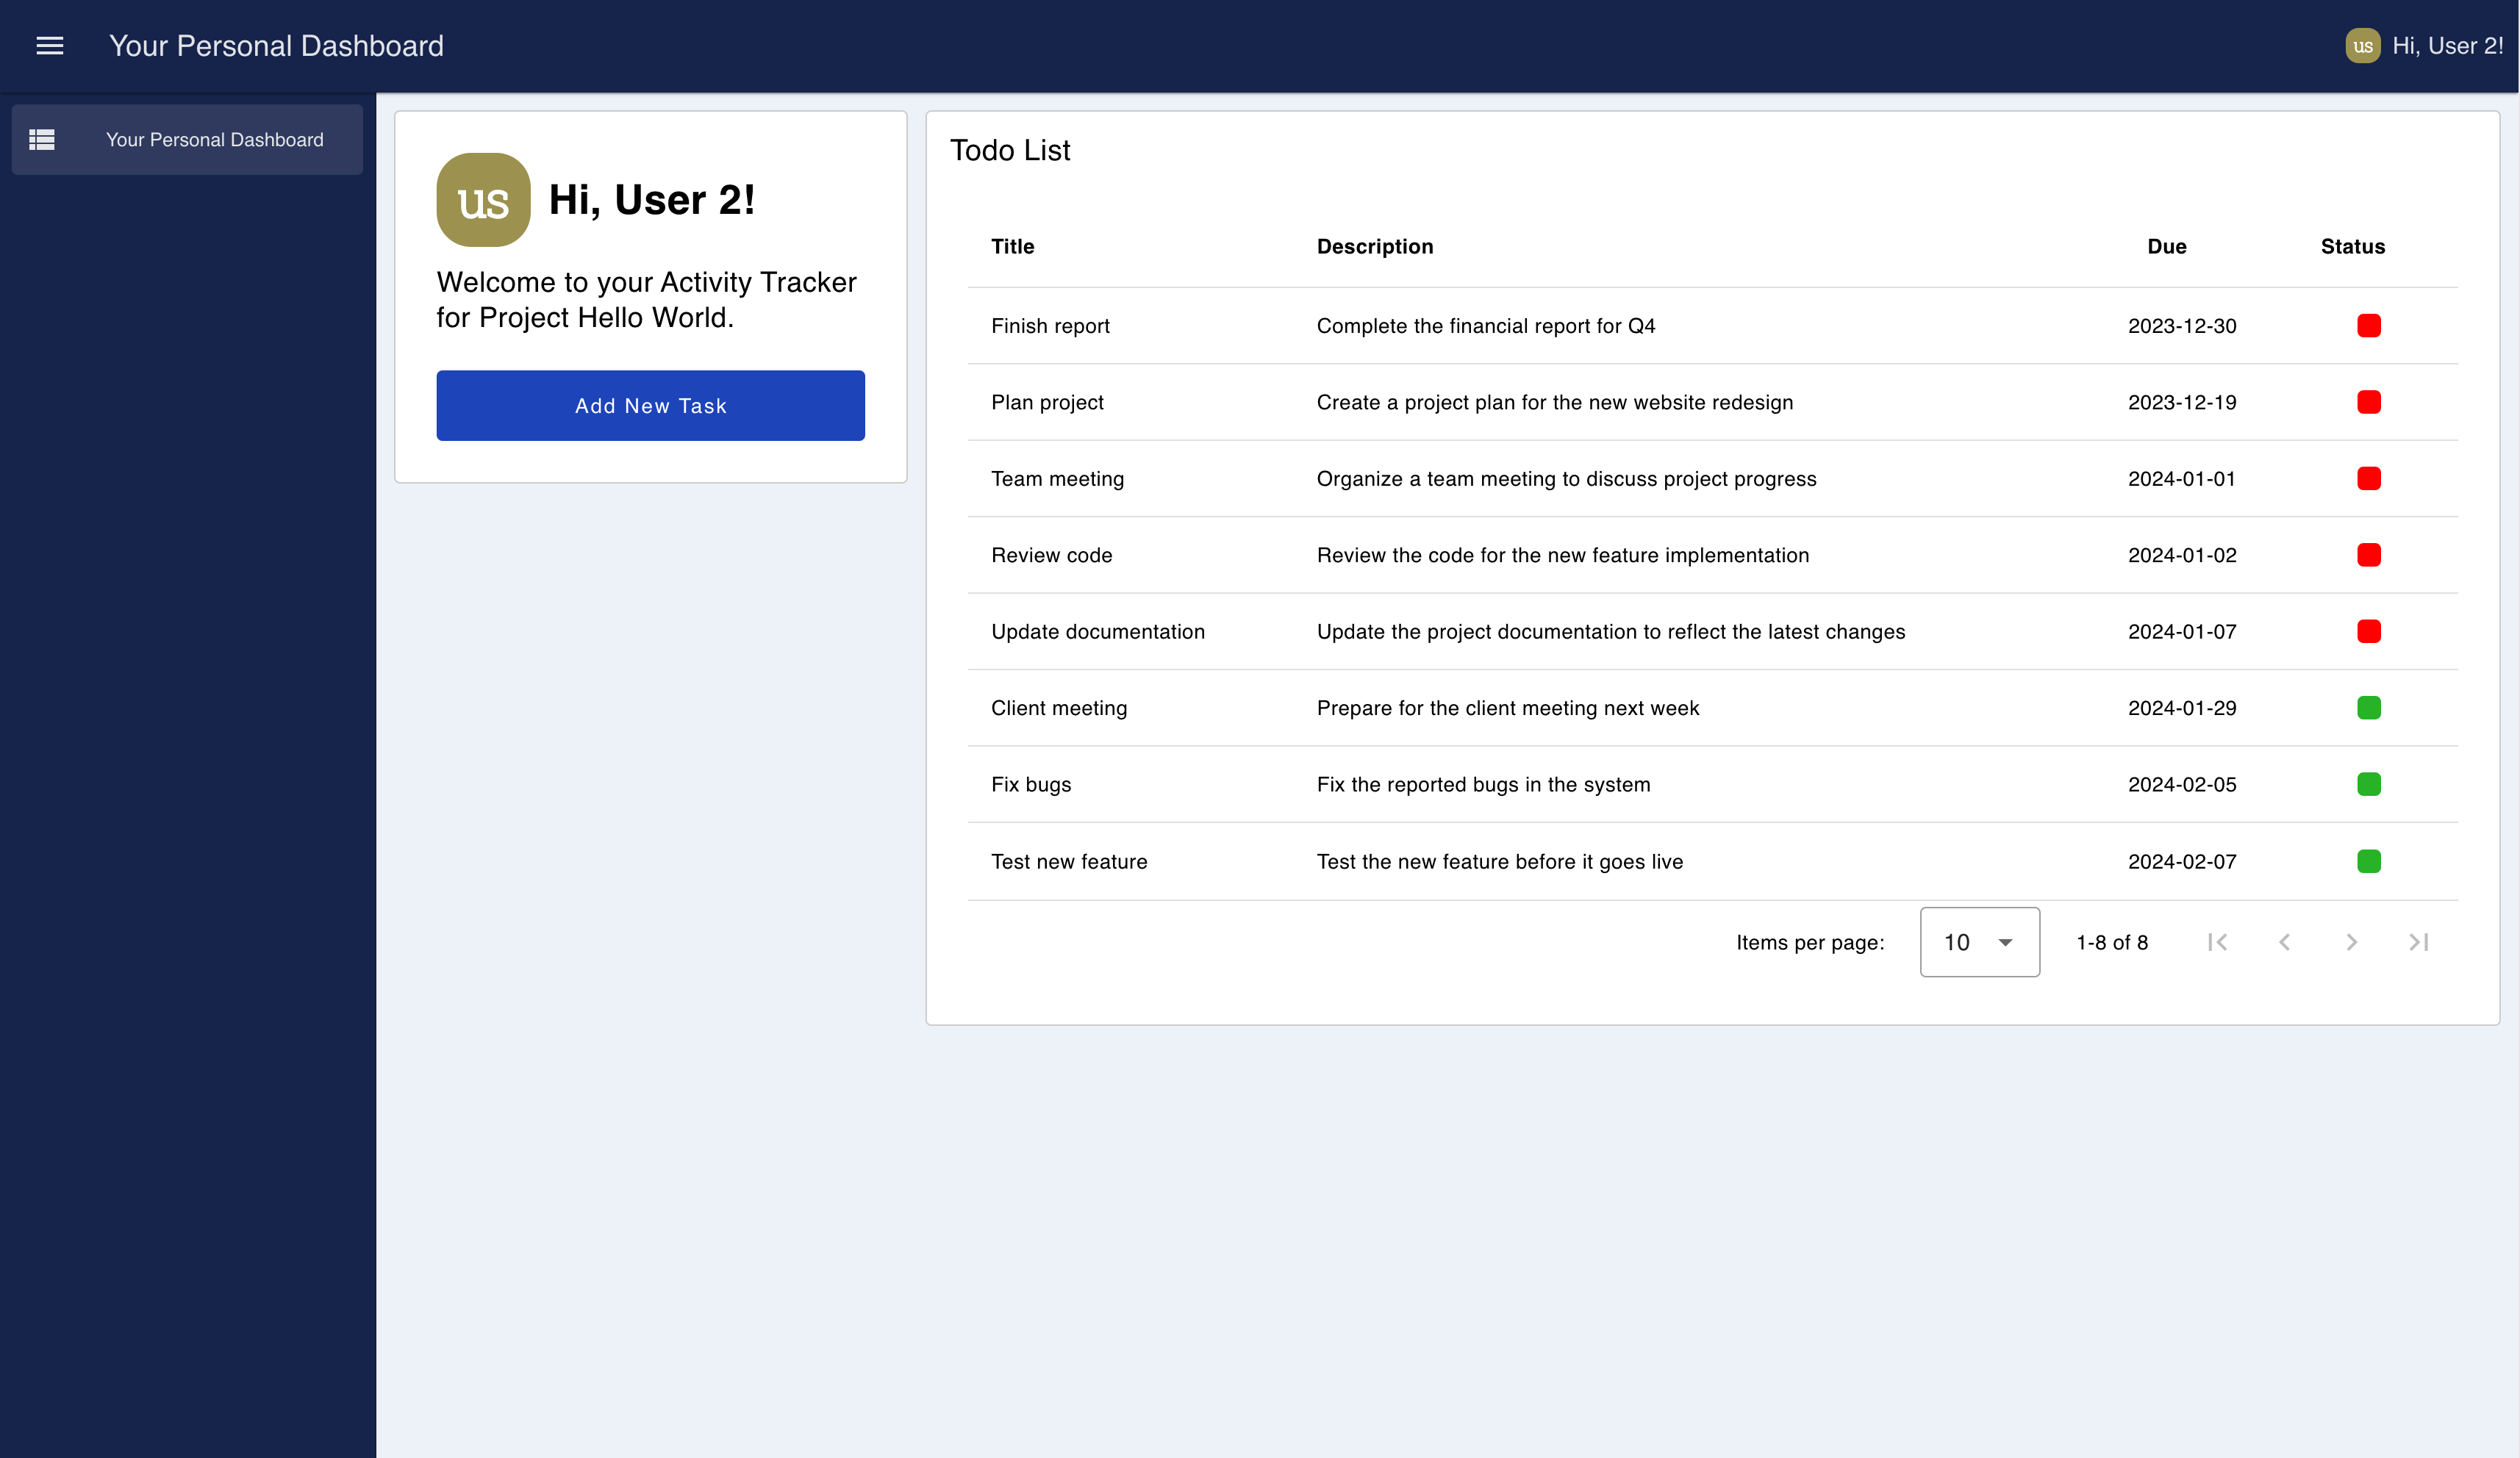 Example of a dashboard using custom templates to render a to-do list